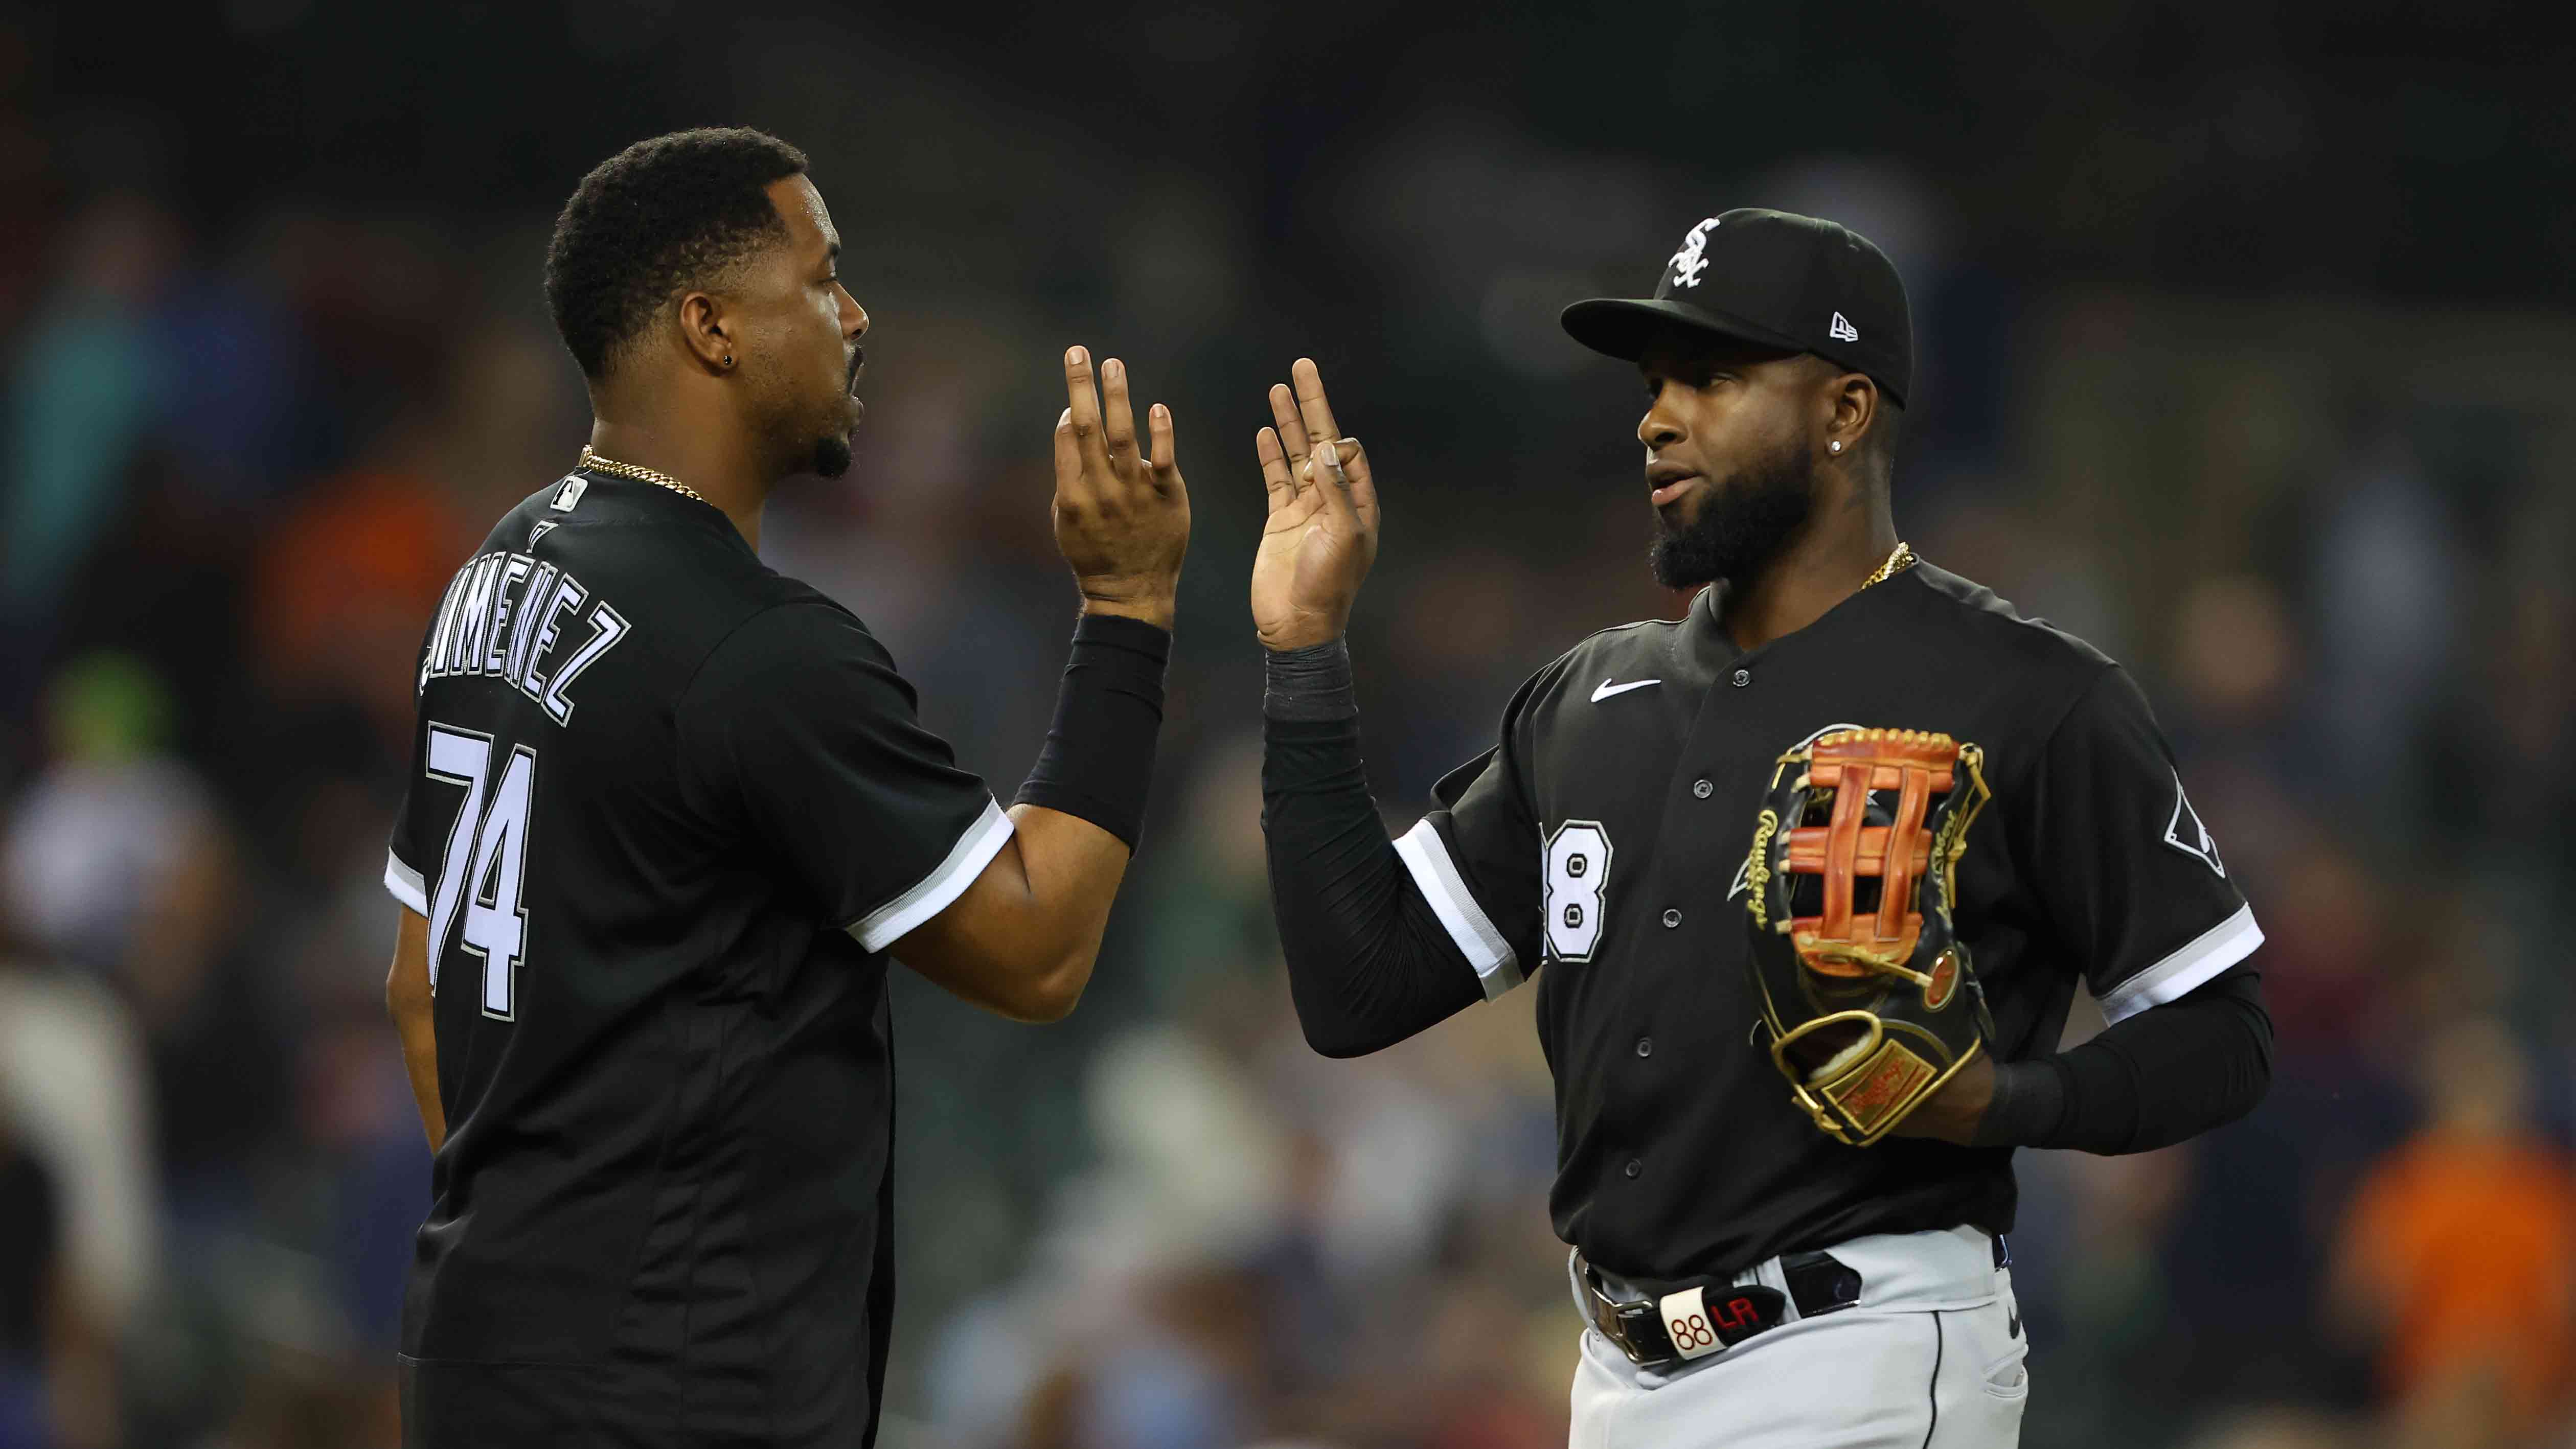 White Sox vs Cubs Stream: Watch MLB online, TV channel - How to